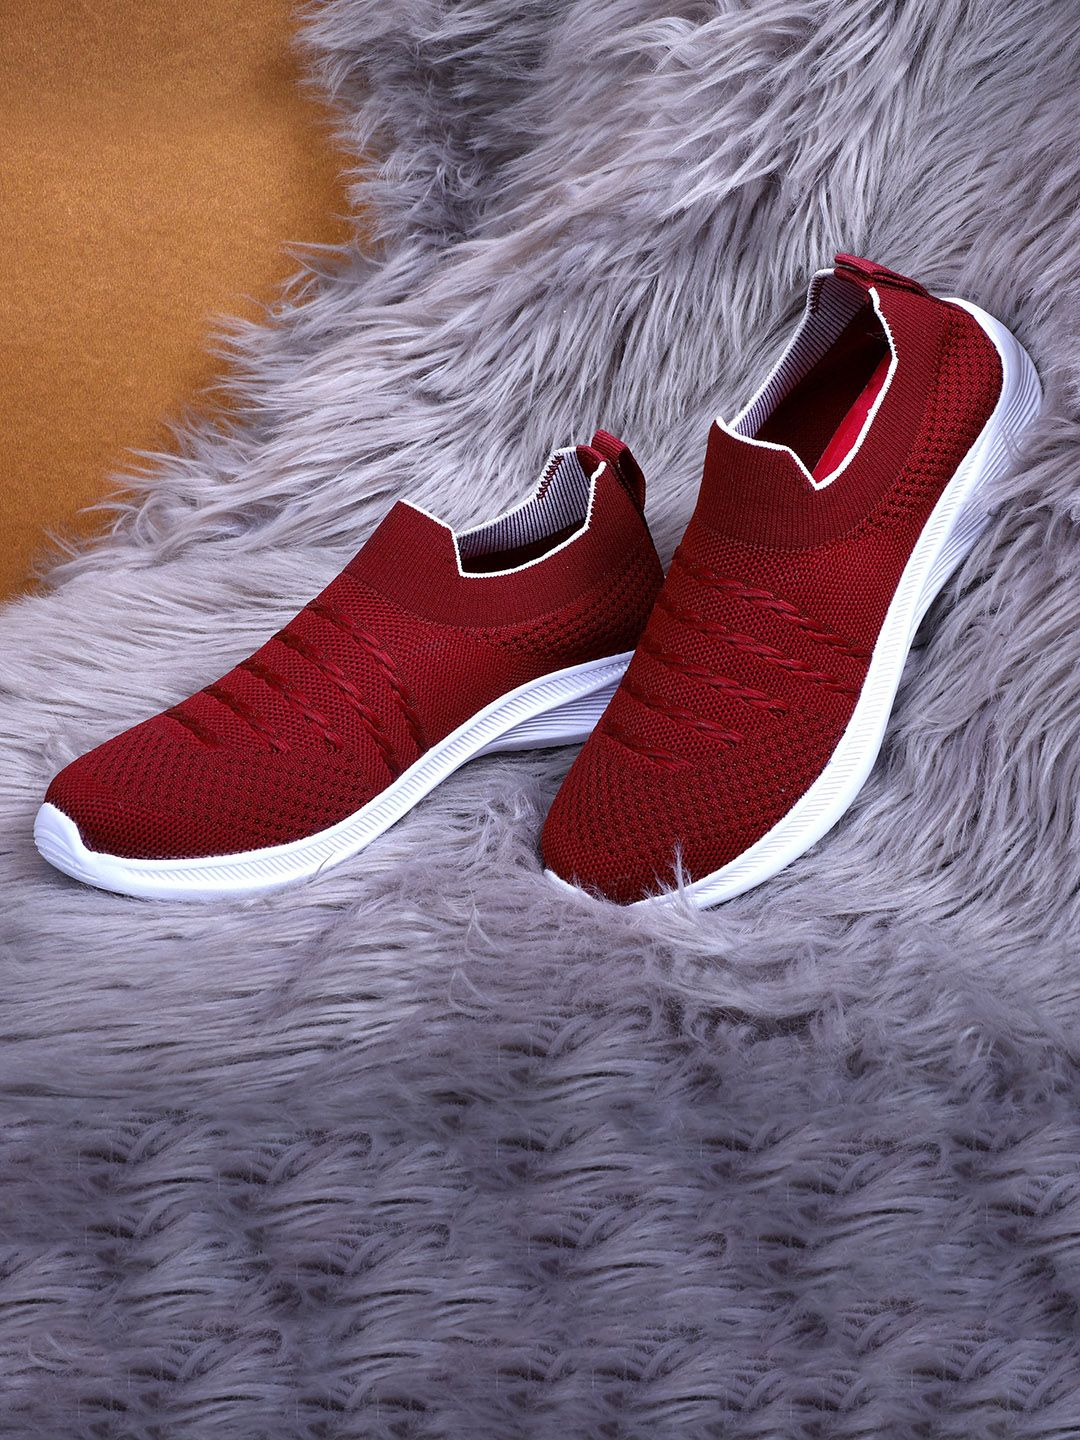 TPENT Women Woven Design Slip-On Sneakers Price in India